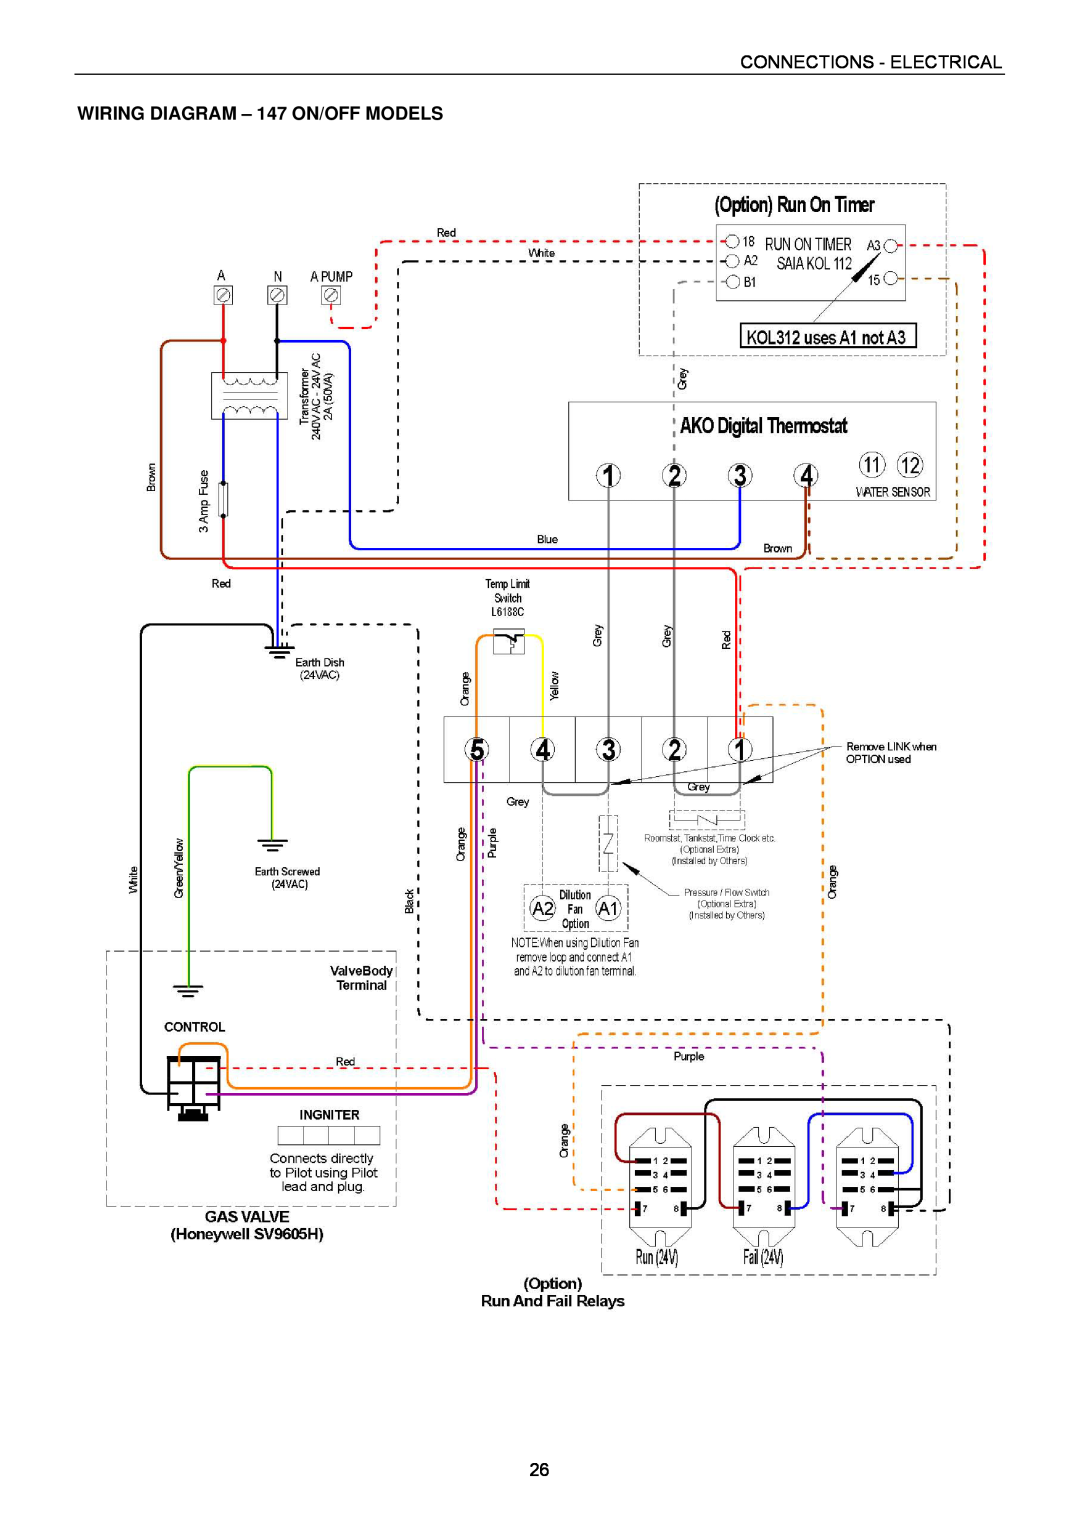 Raypak B0147, B0109 installation instructions WIRING DIAGRAM - 147 ON/OFF MODELS, Connections - Electrical 